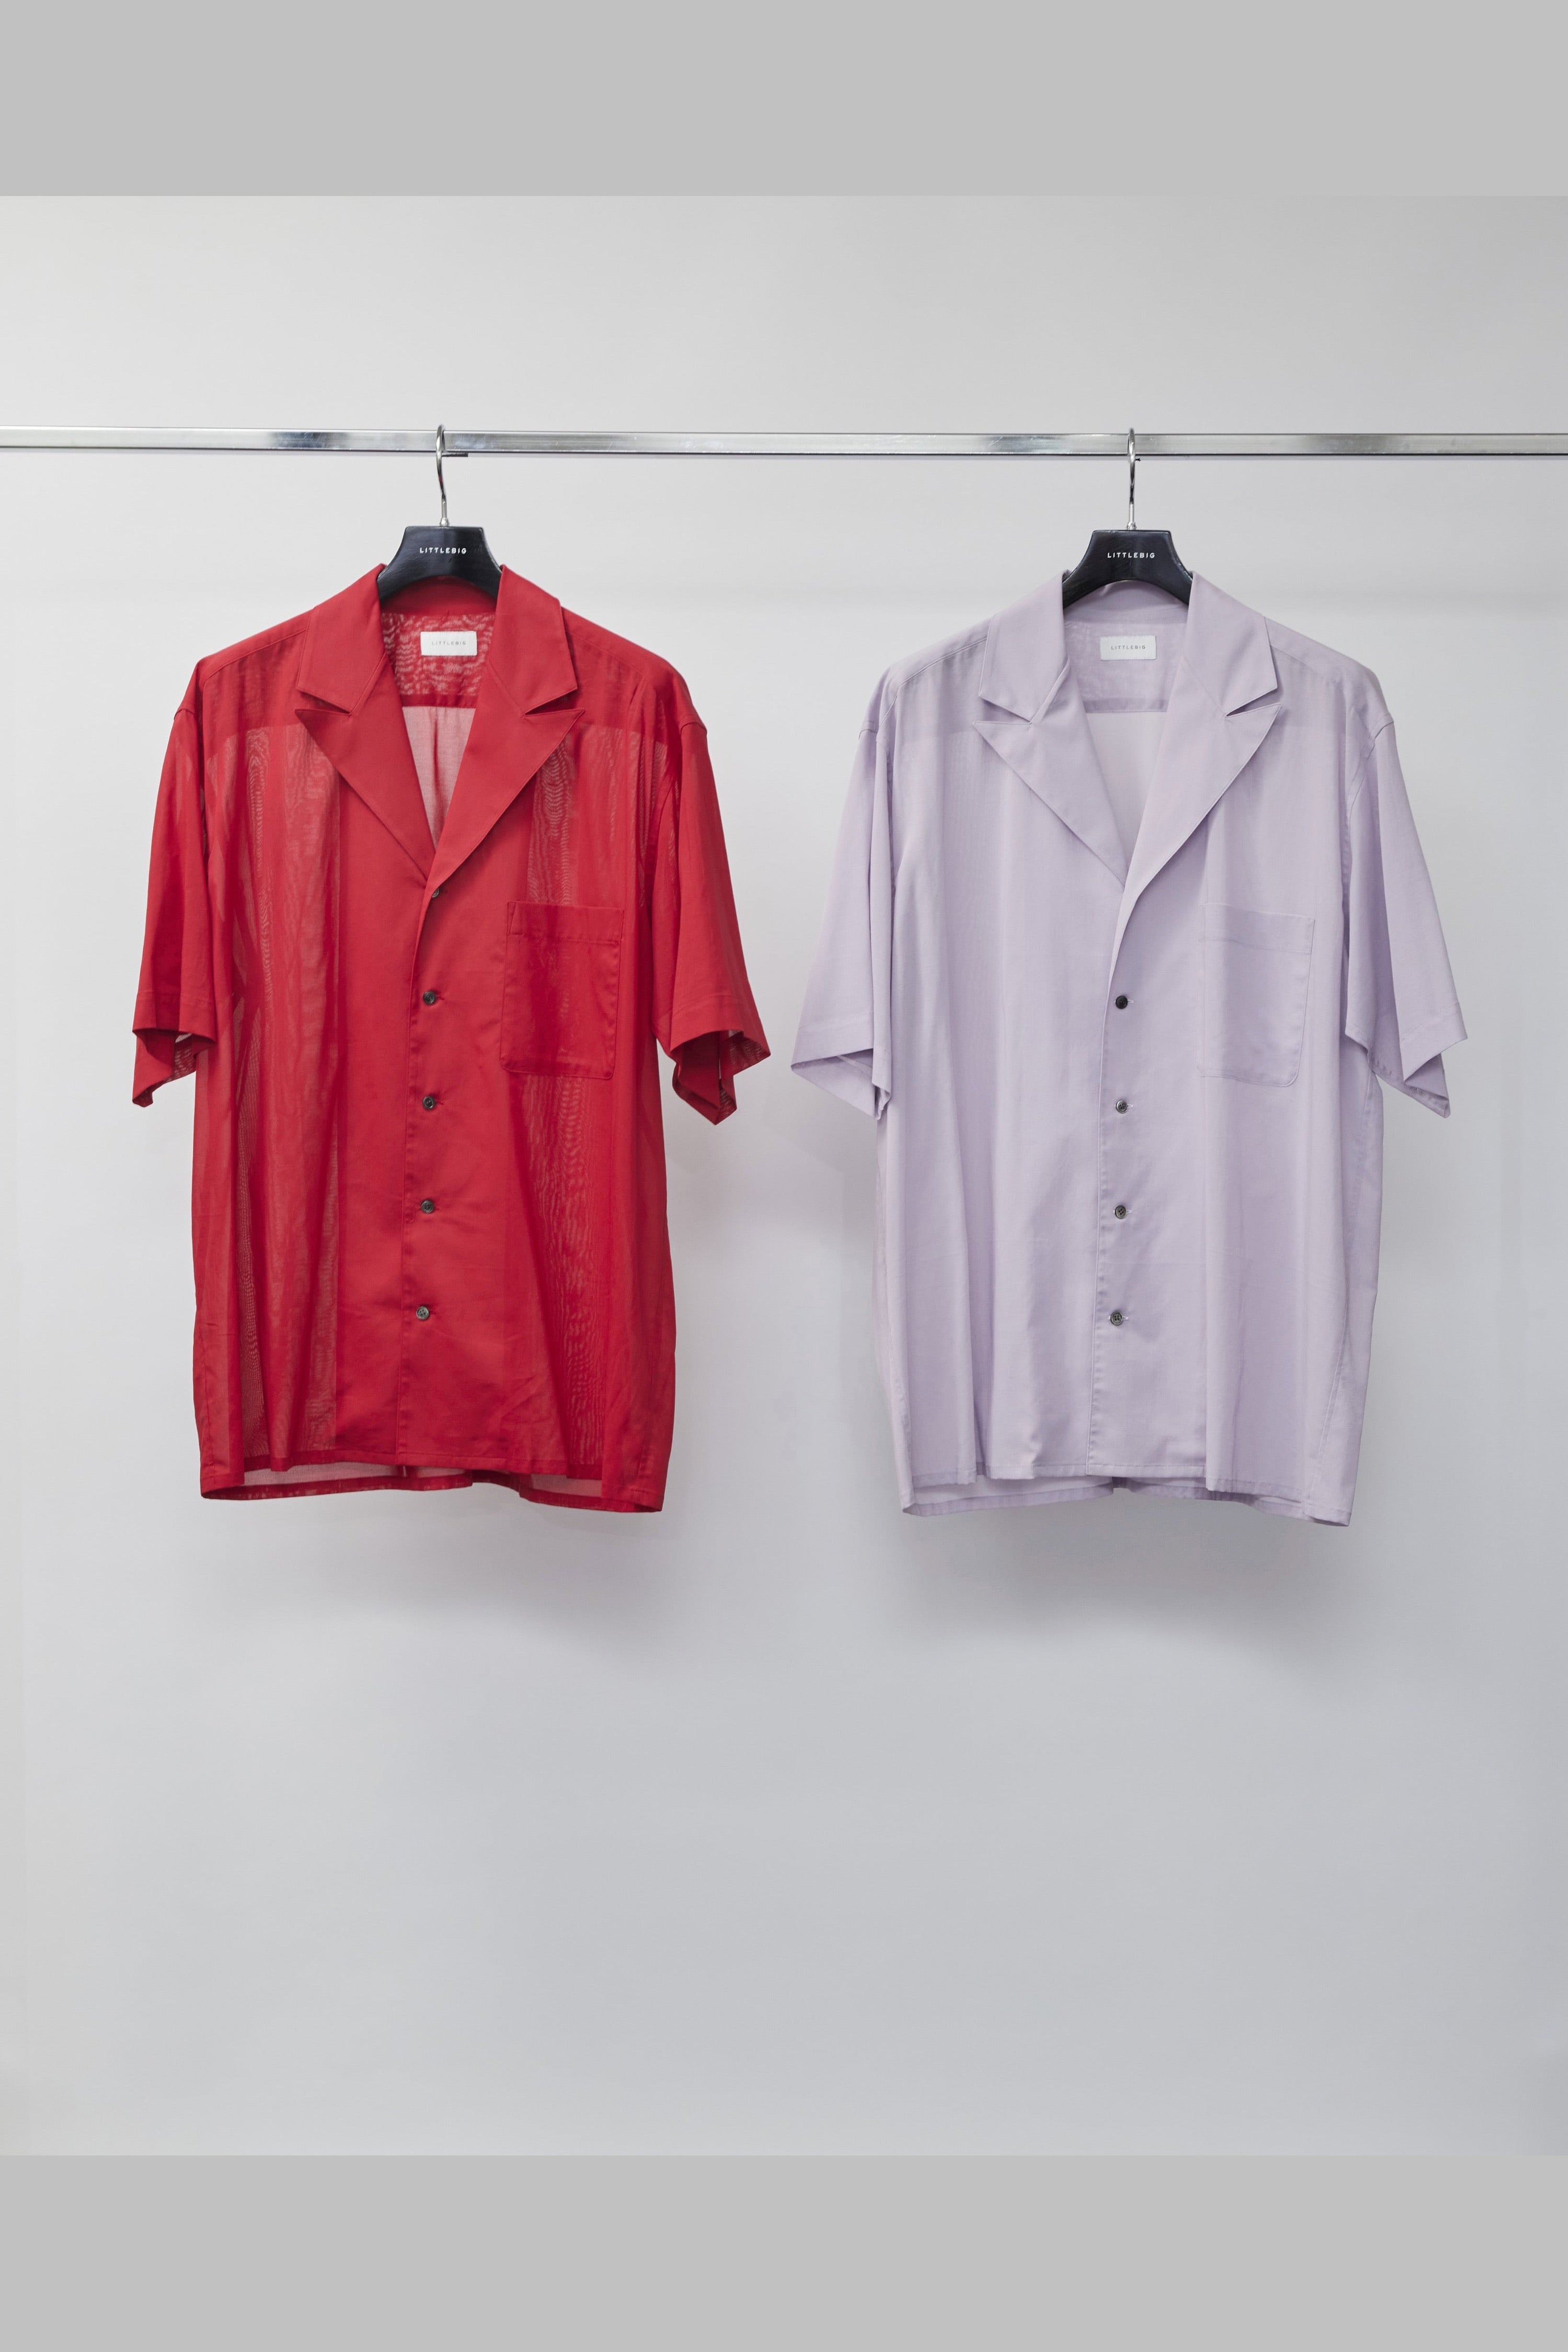 LITTLEBIG(リトルビッグ)のPeaked Lapel Color S/S SH Red or Pink